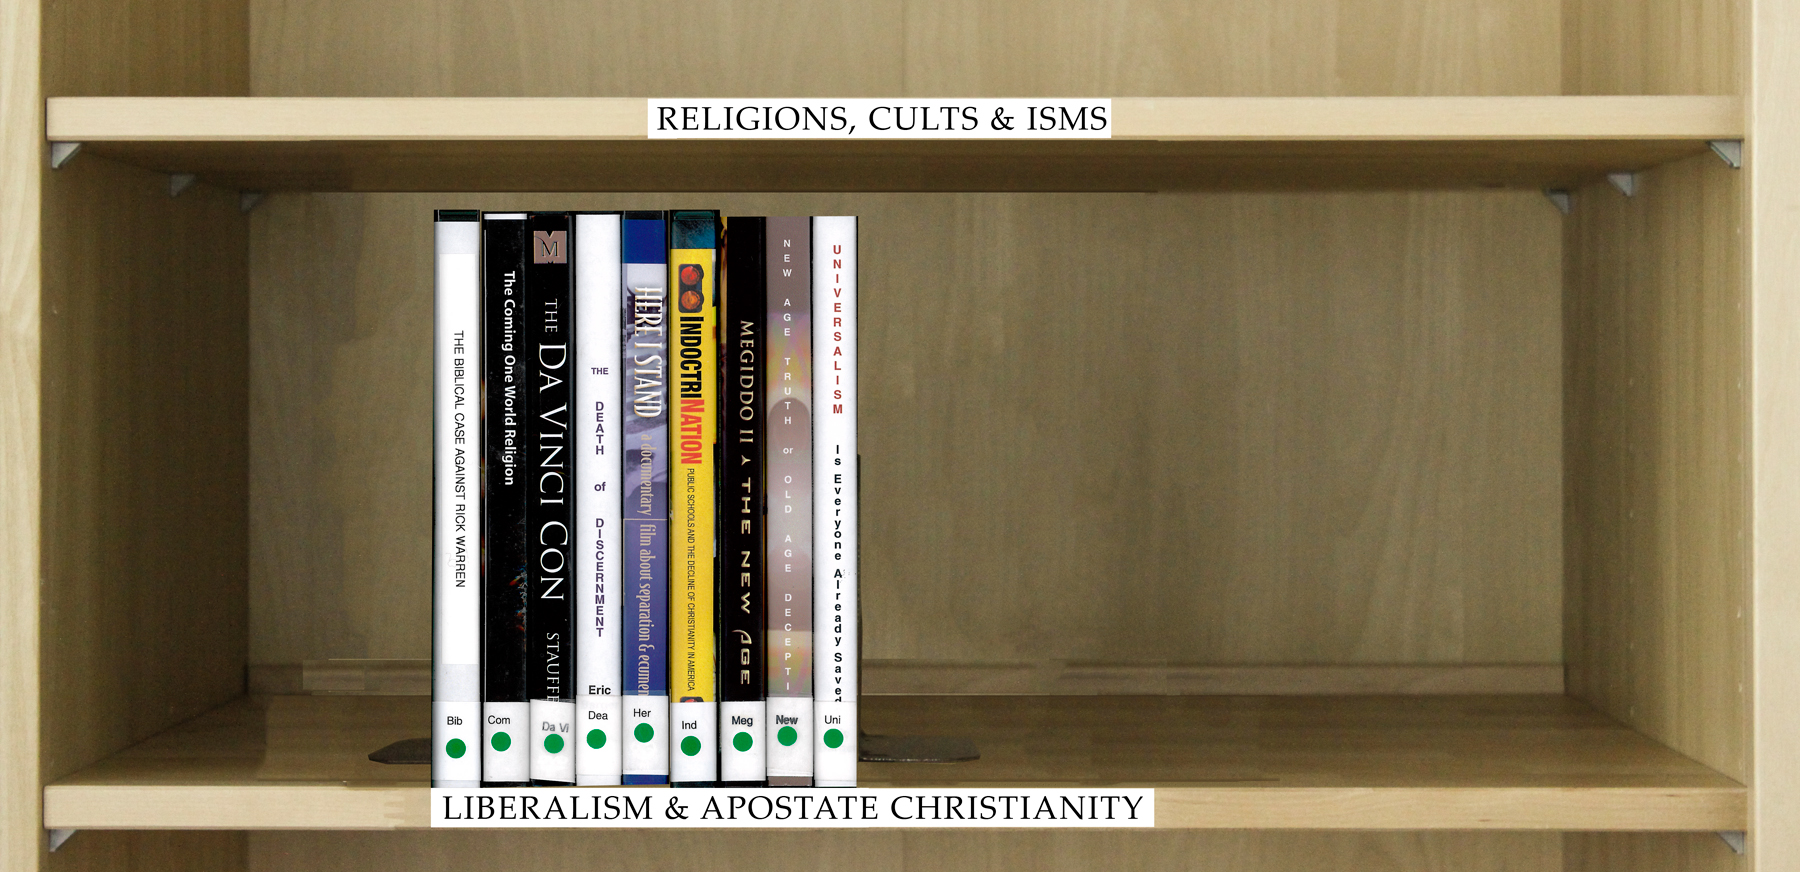 Index of DVD's Under the Category Liberalism & Apostate Christianity.